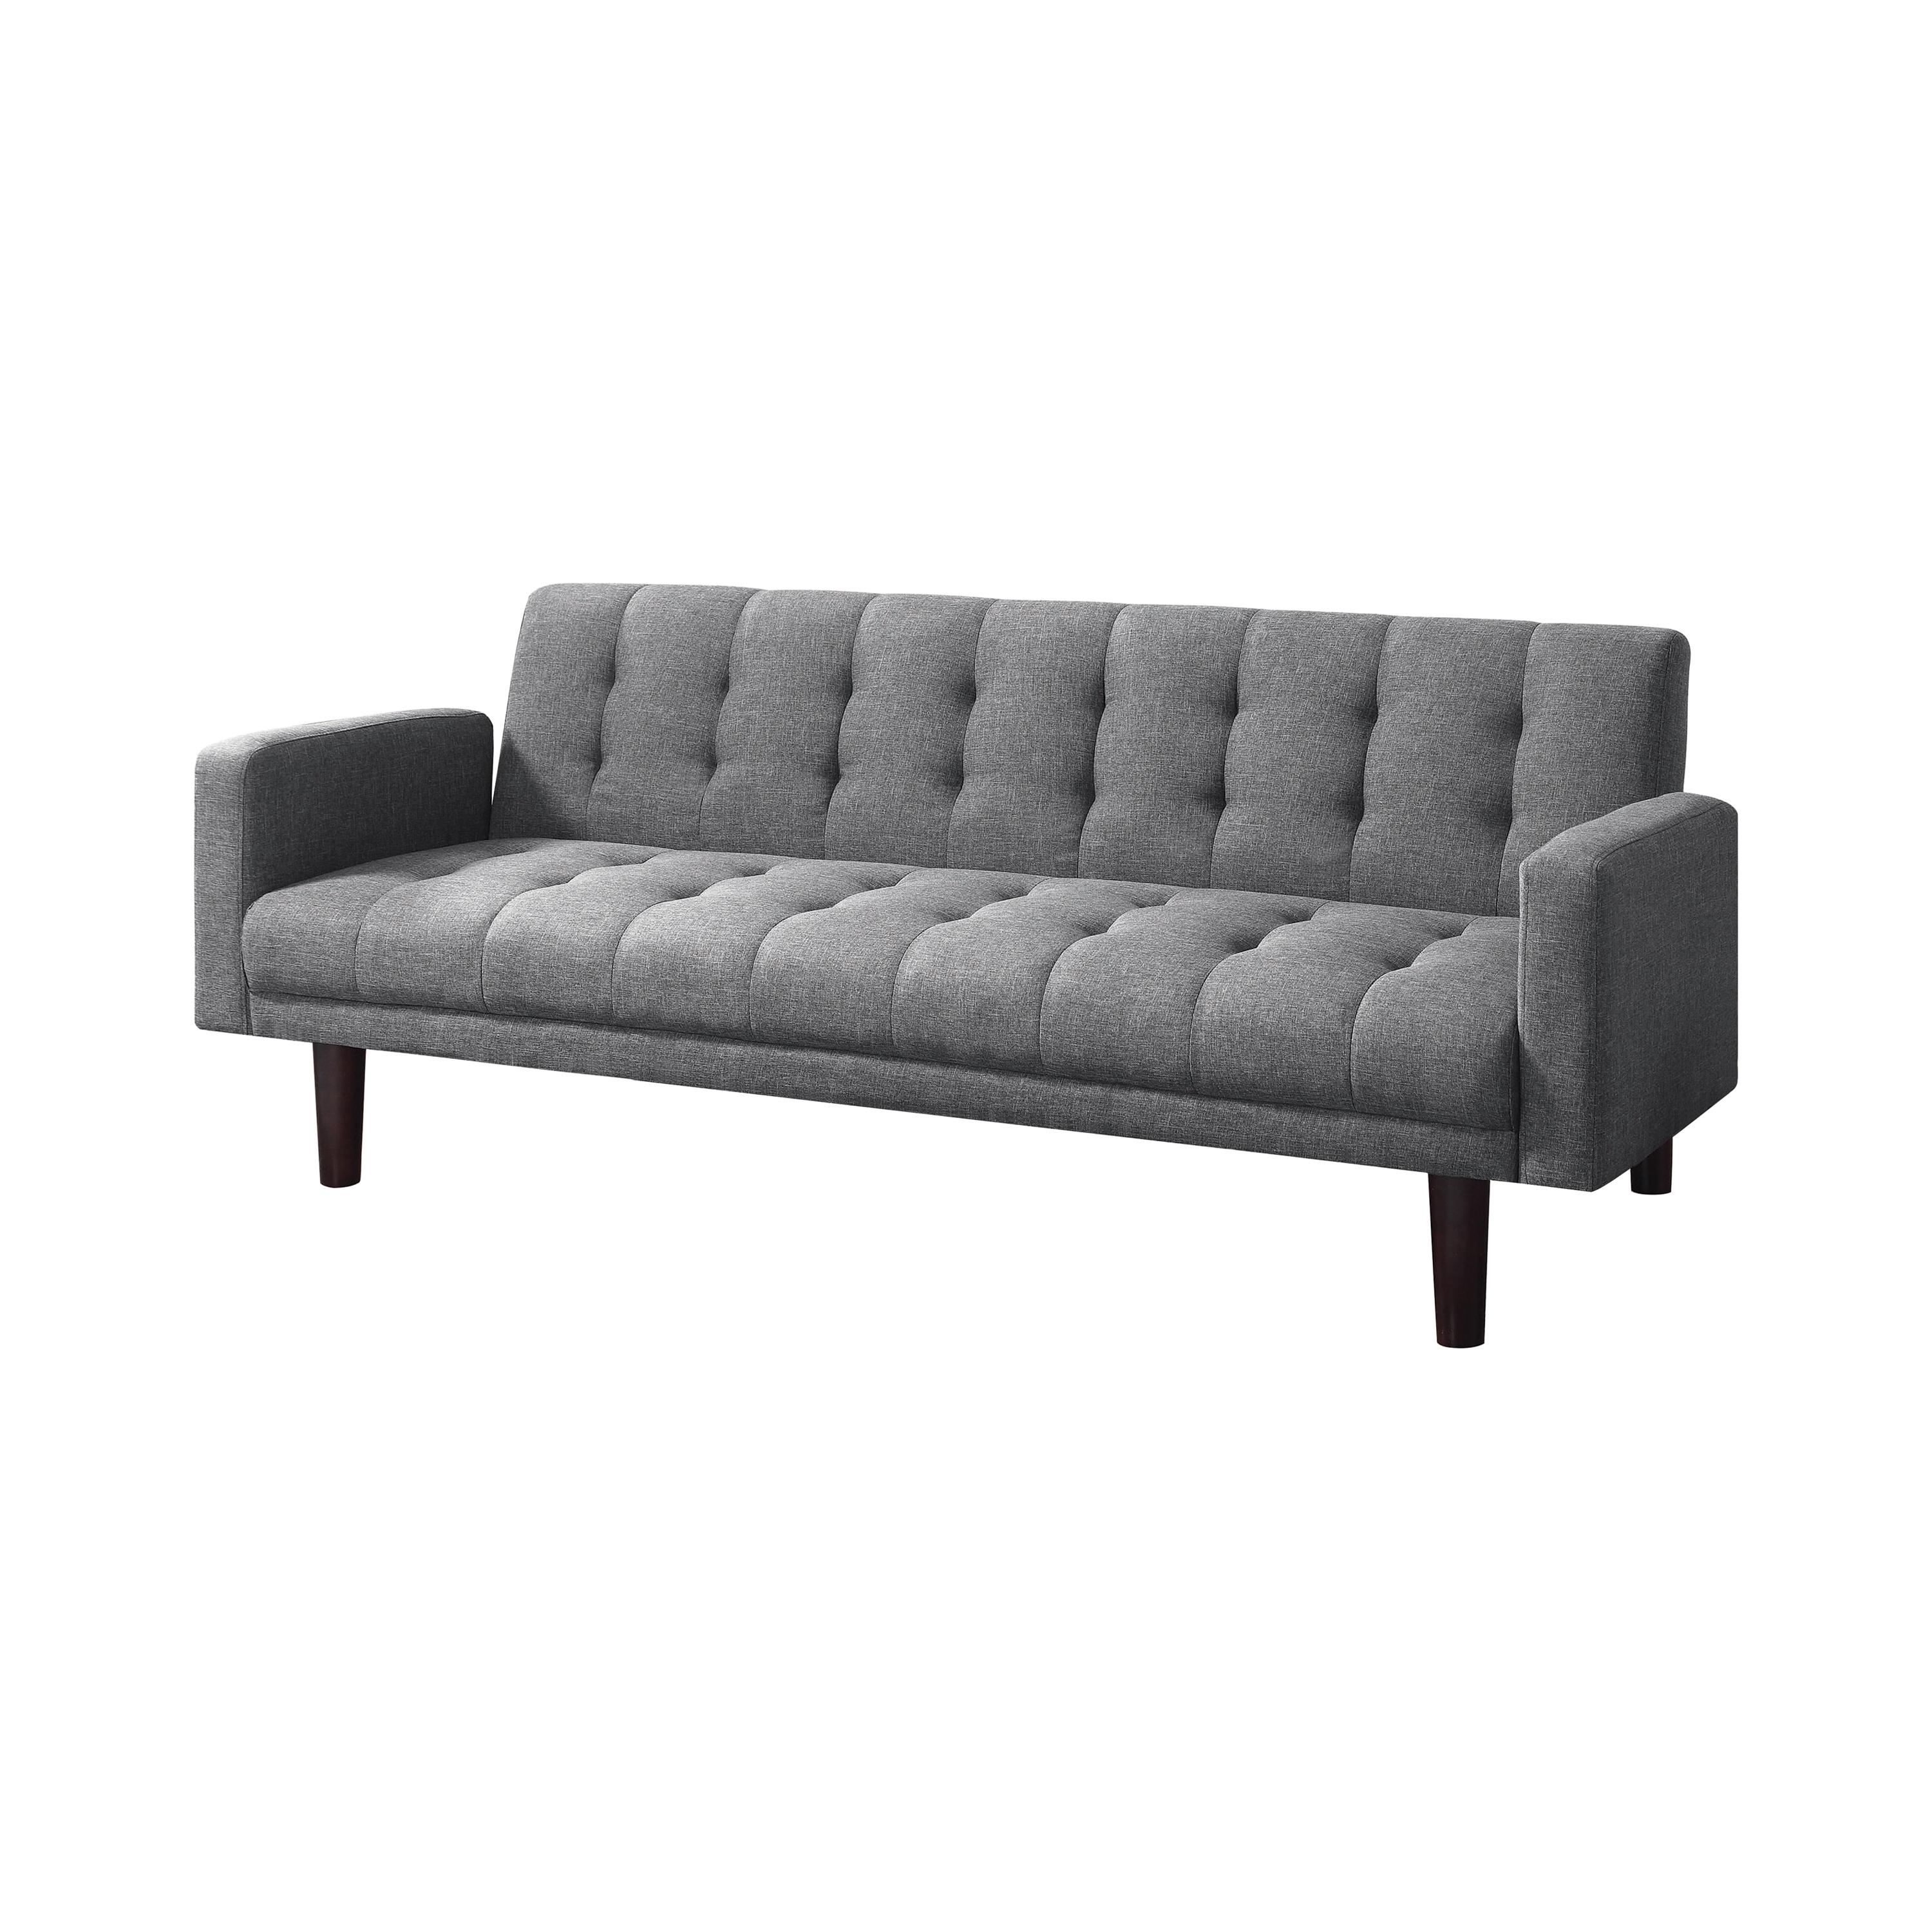 

    
Contemporary Gray Woven Fabric Sofa Bed Coaster 360150 Sommer
